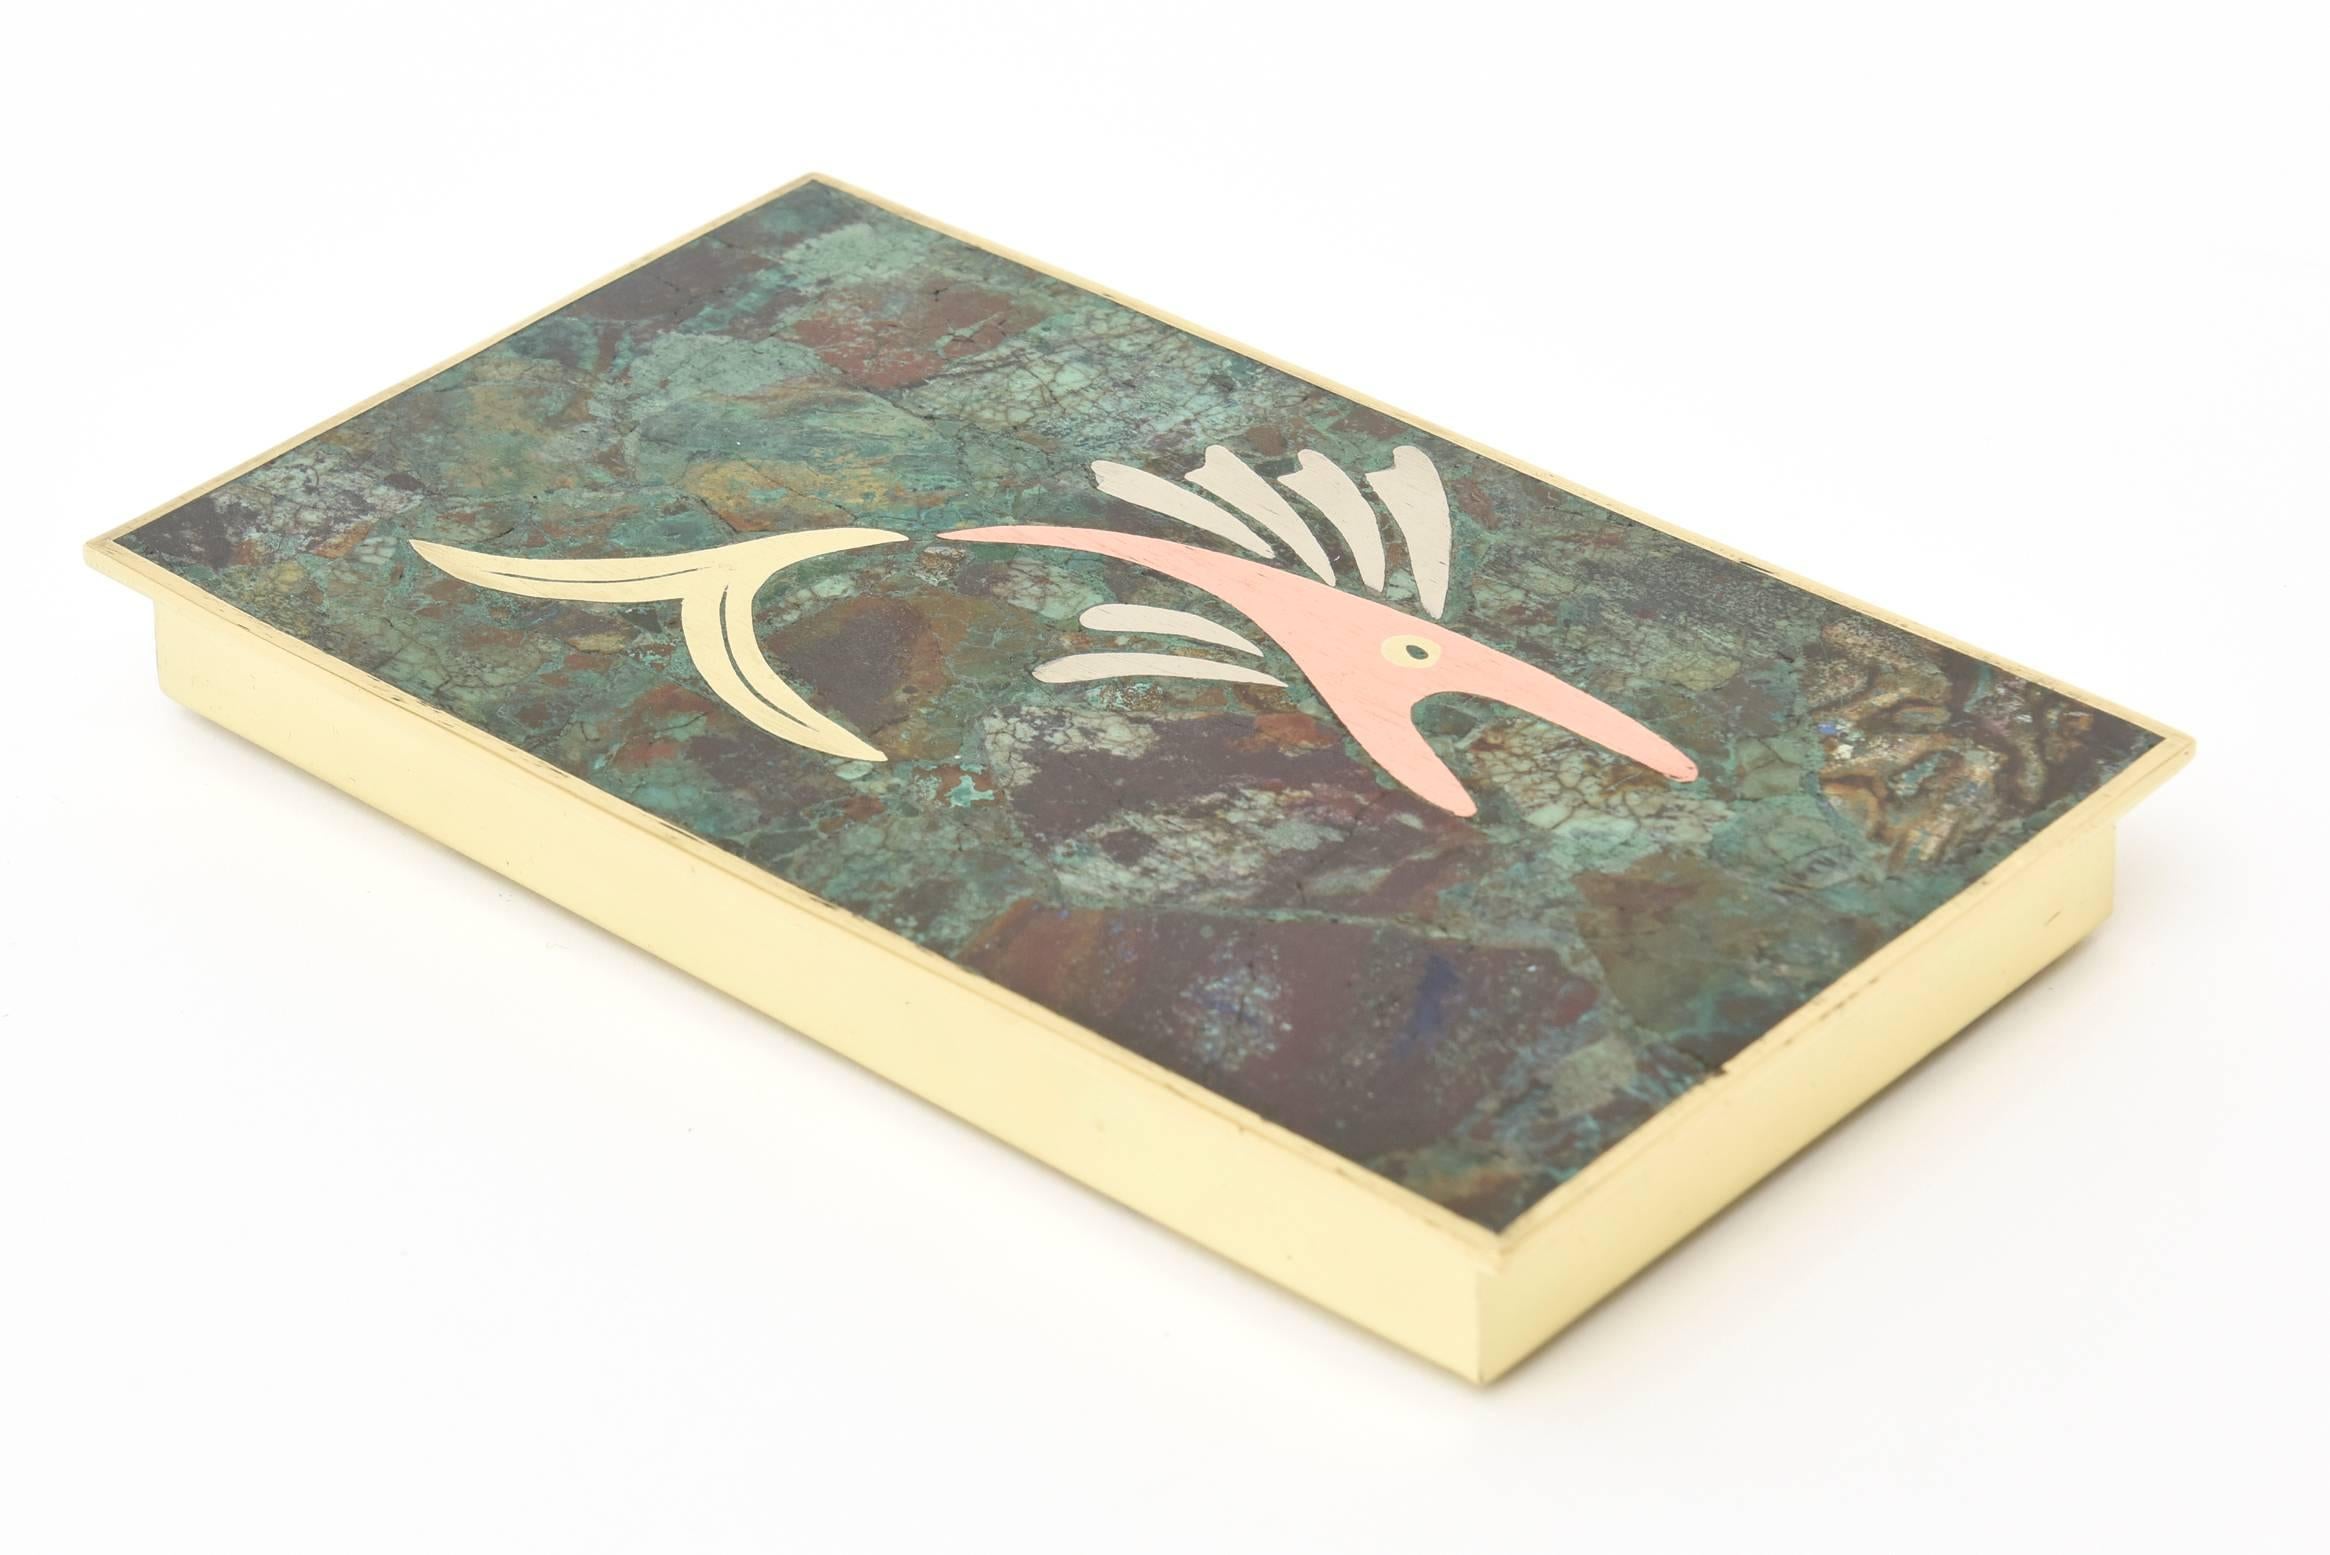 This lovely hallmarked Mexican Mid-Century Modern hinged box has mixed metals of brass, silver plate and copper along with sodalite, malachite and turquoise stone pieces. The fish motif in mixed metals on top of the box sit on the different stone